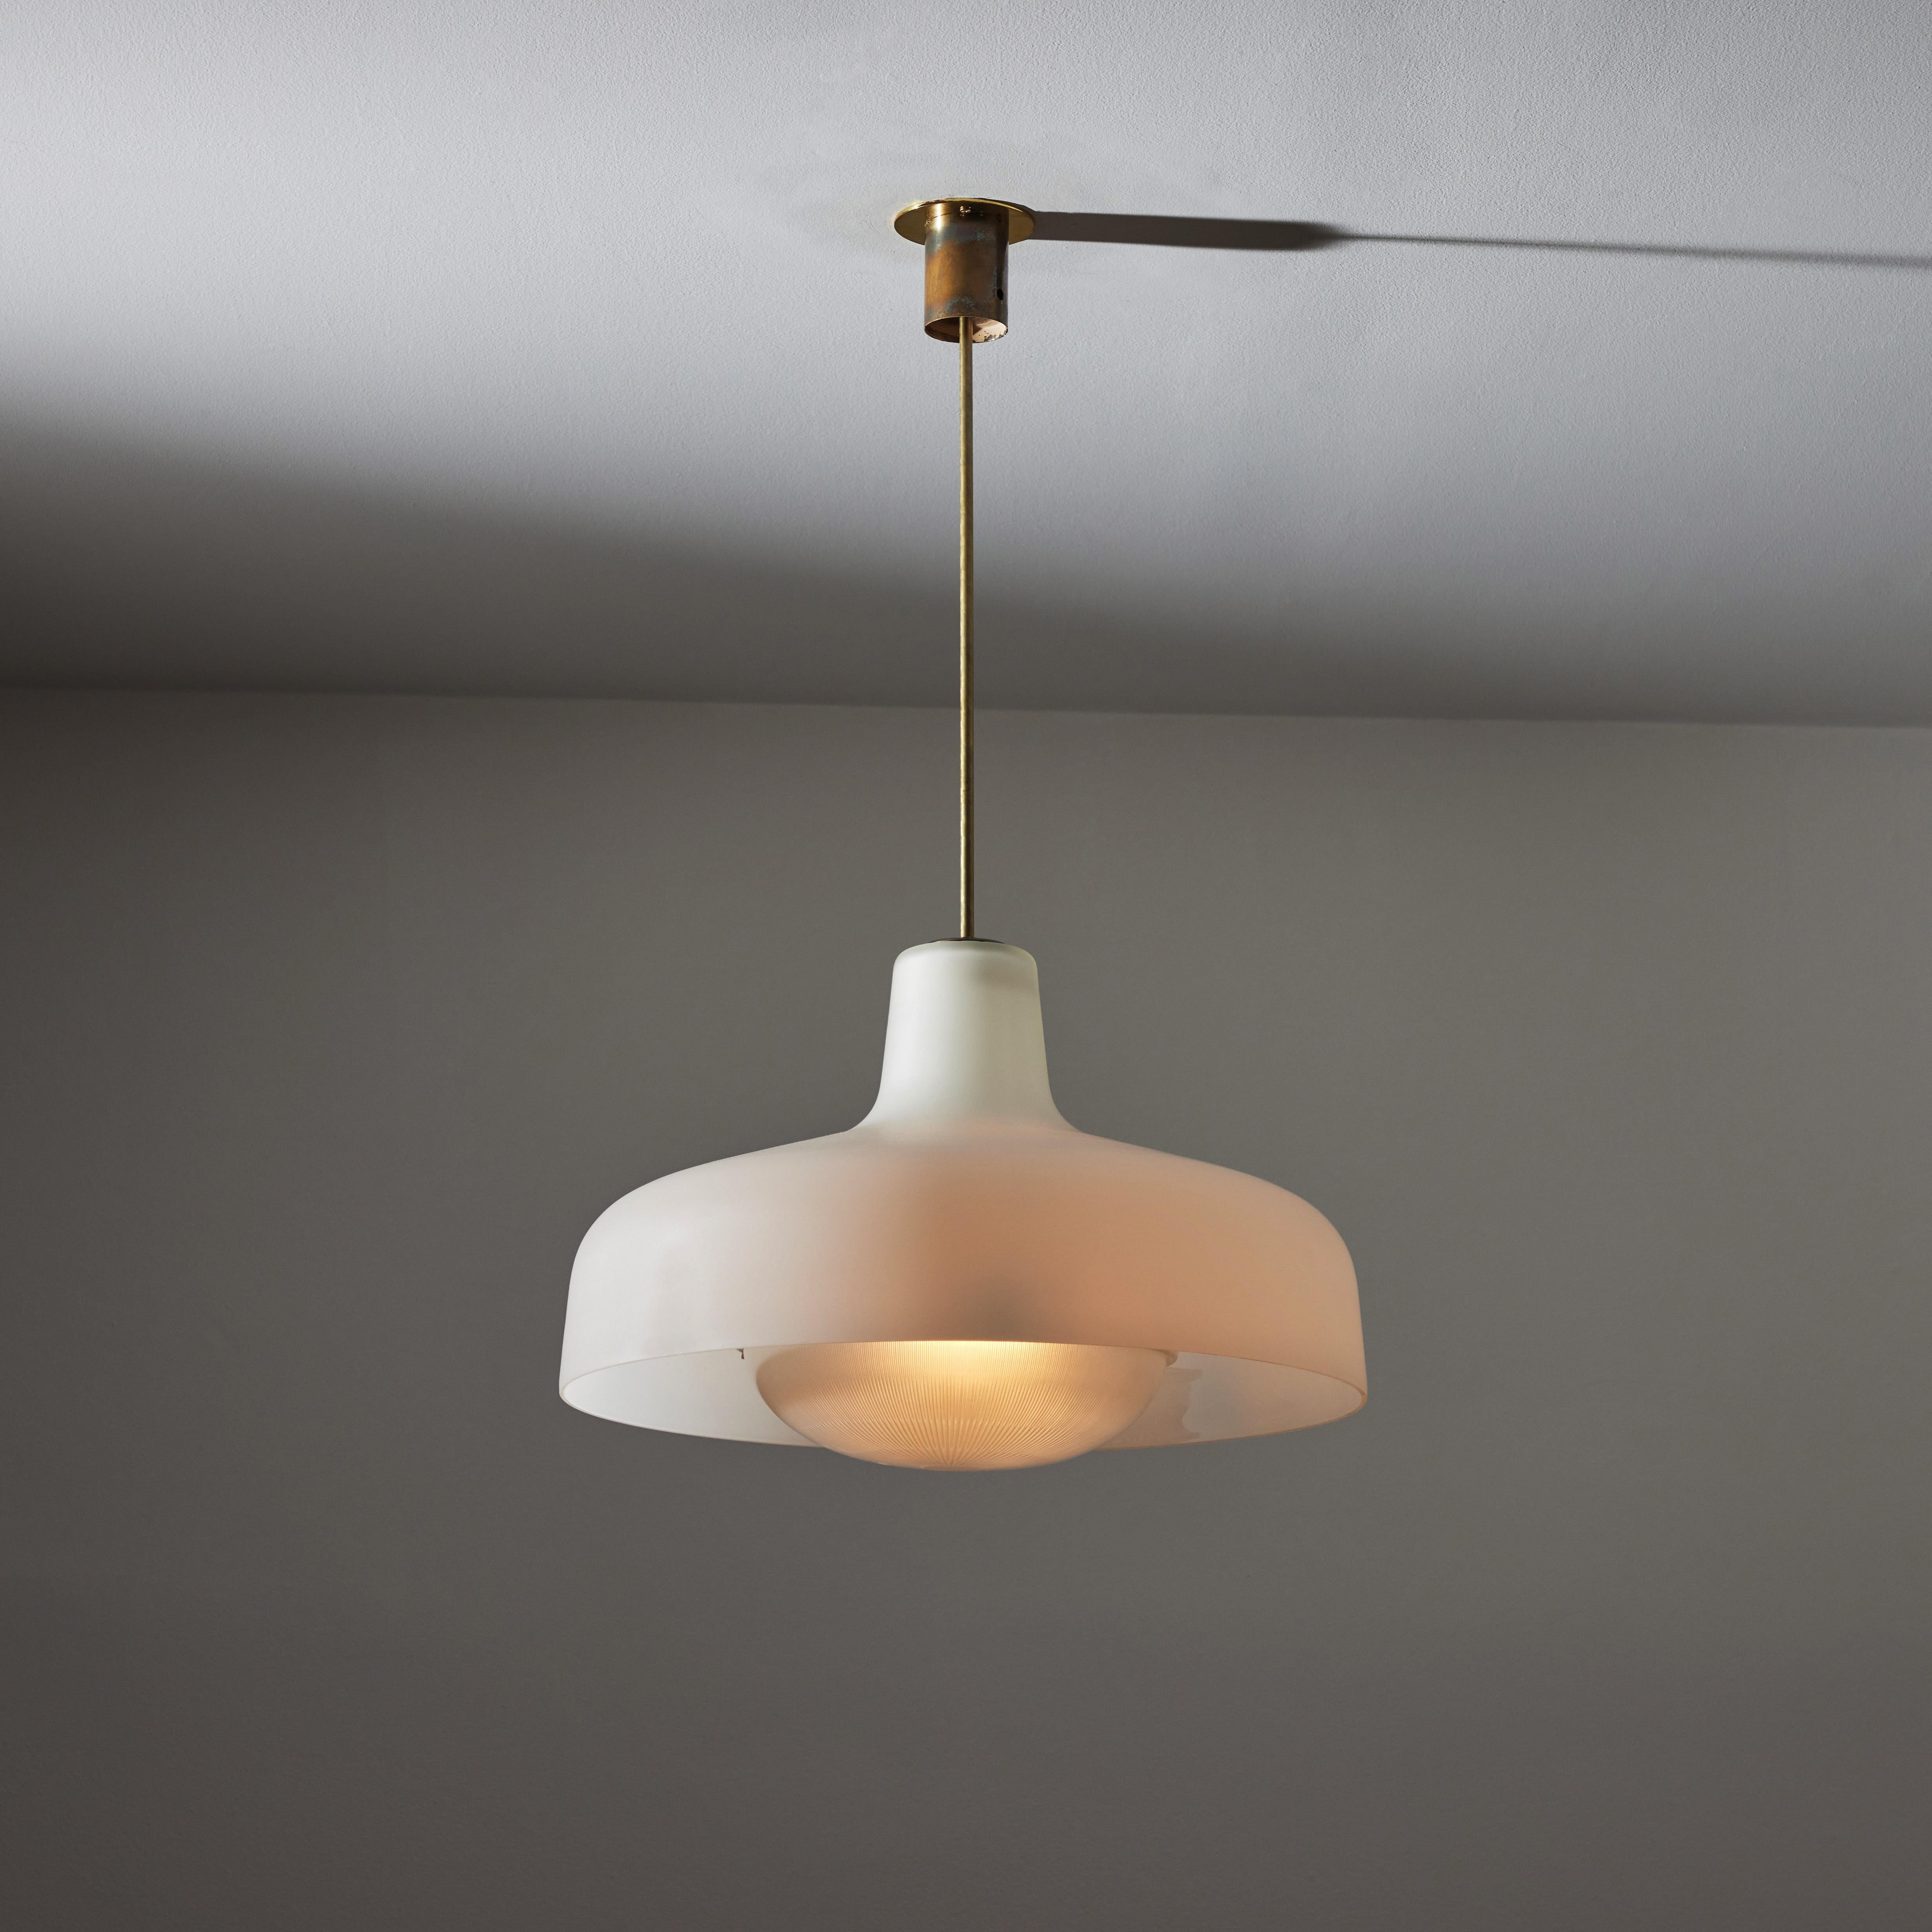 Patinated Model LS7 “Paolina” Ceiling Light by Ignazio Gardella for Azucena